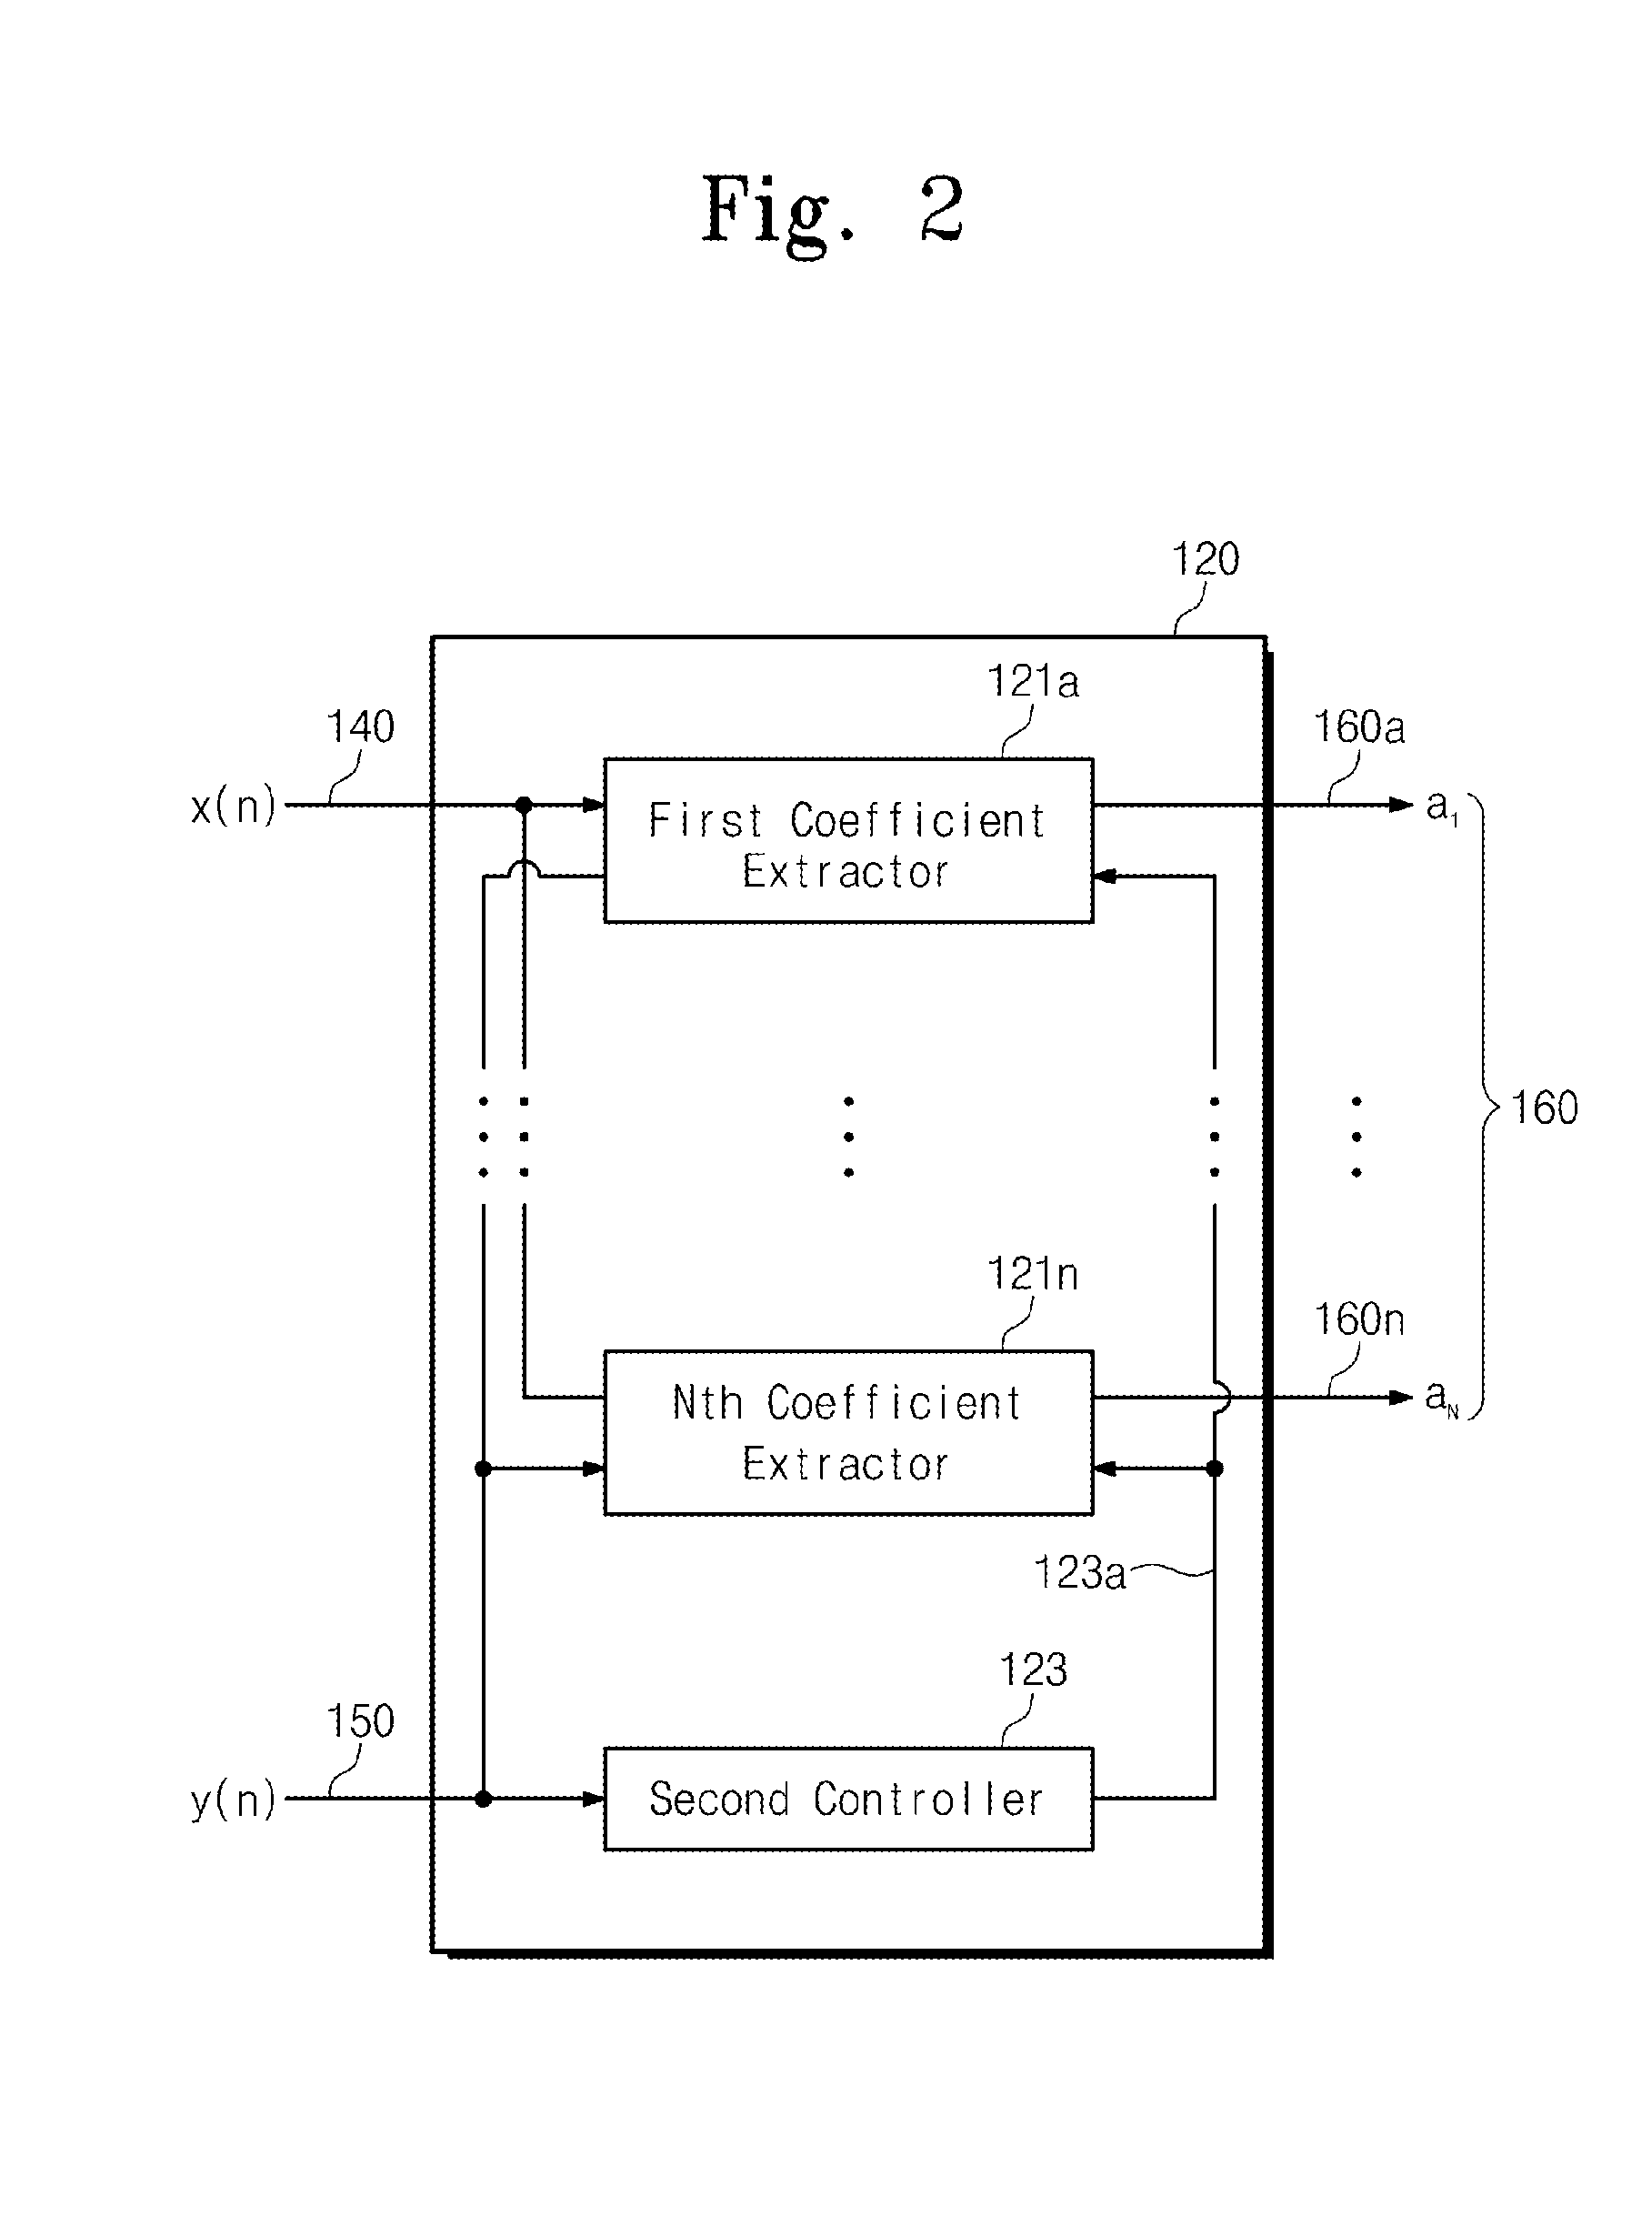 Predistortion apparatuses and methods